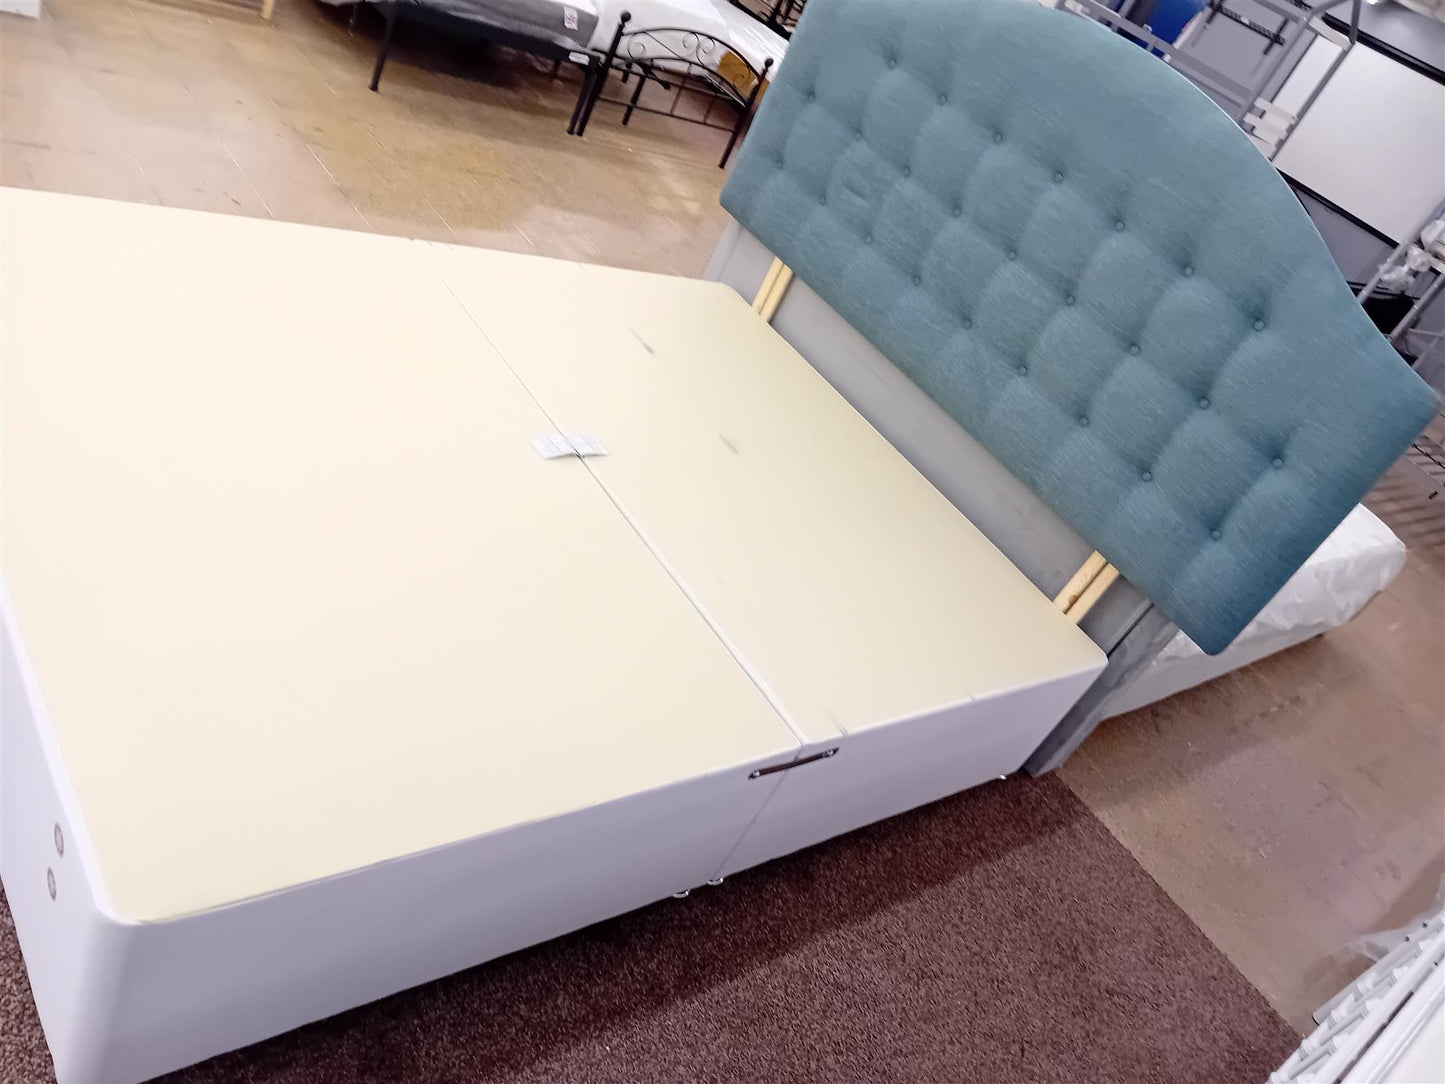 King Size White & Turquoise Bed Frame